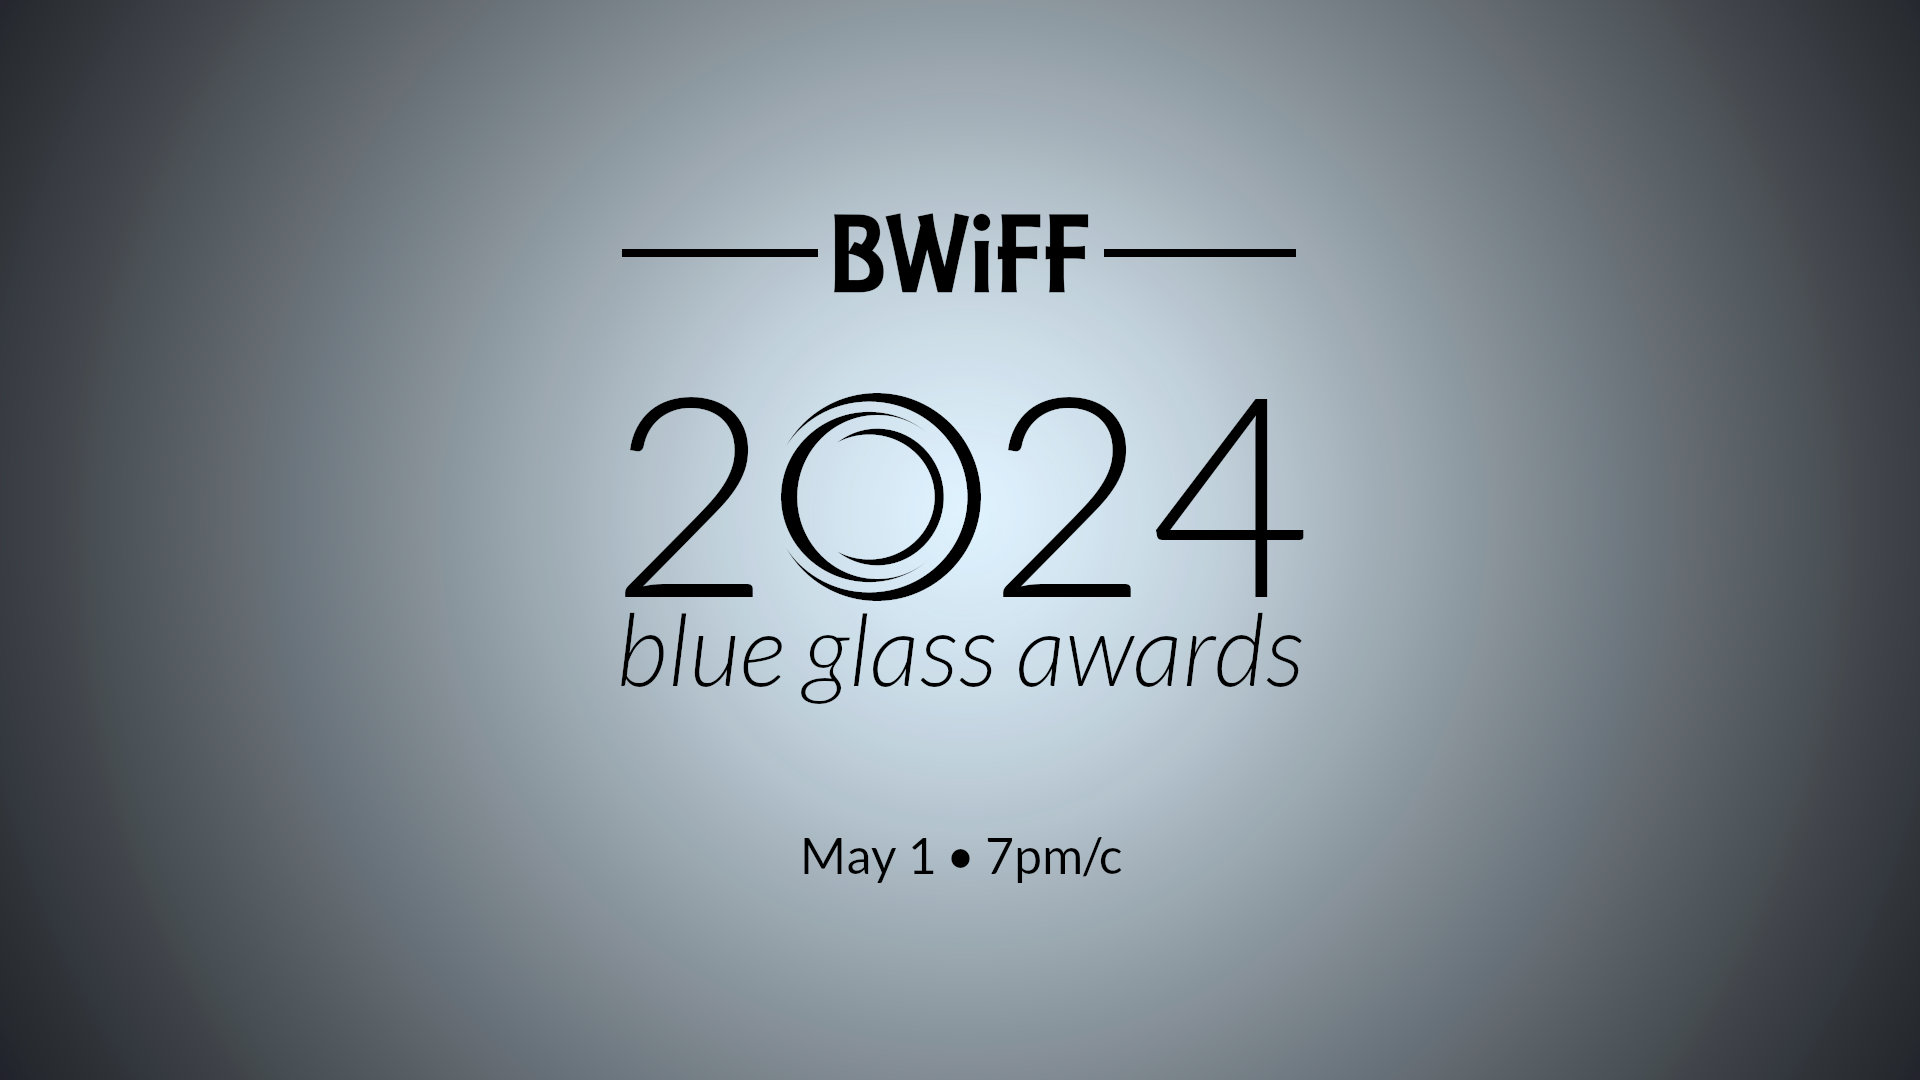 2024 Blue Glass Awards on May 1 at 7pm/c